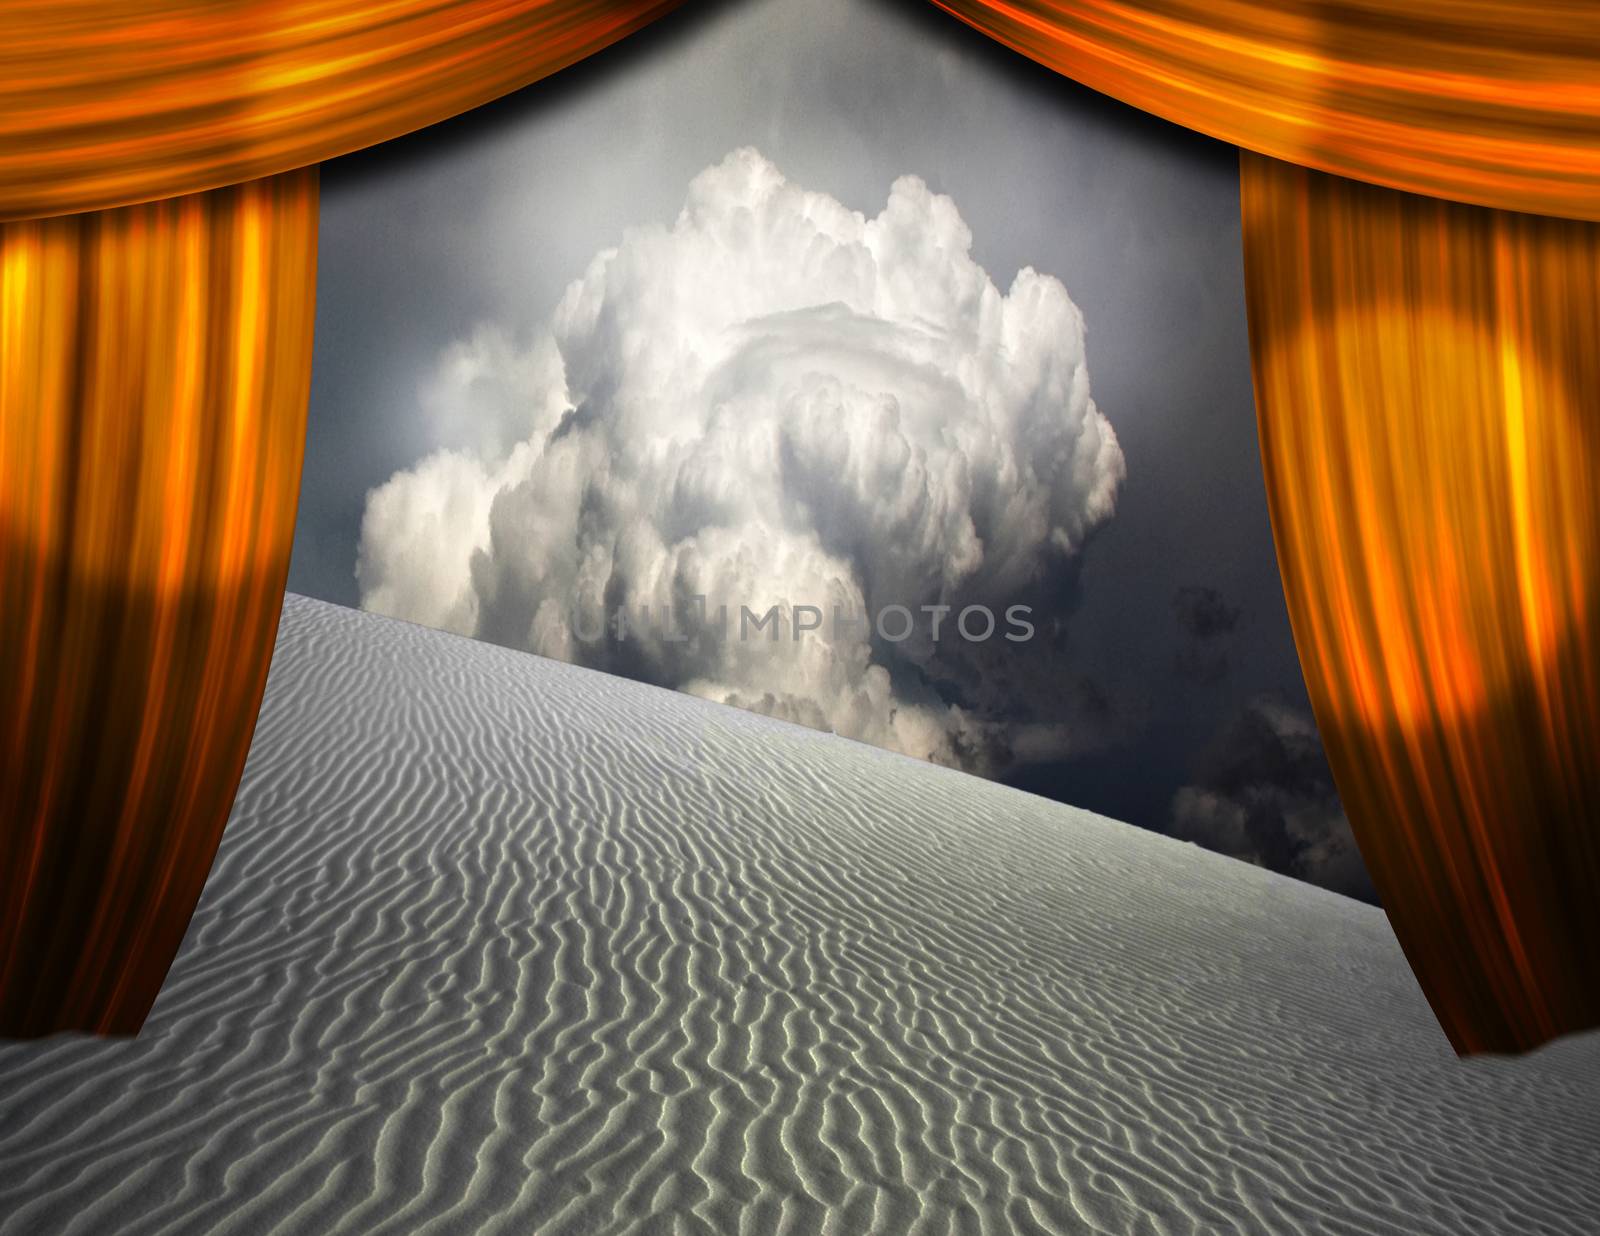 Desert Sands seen through opening in curtains by applesstock